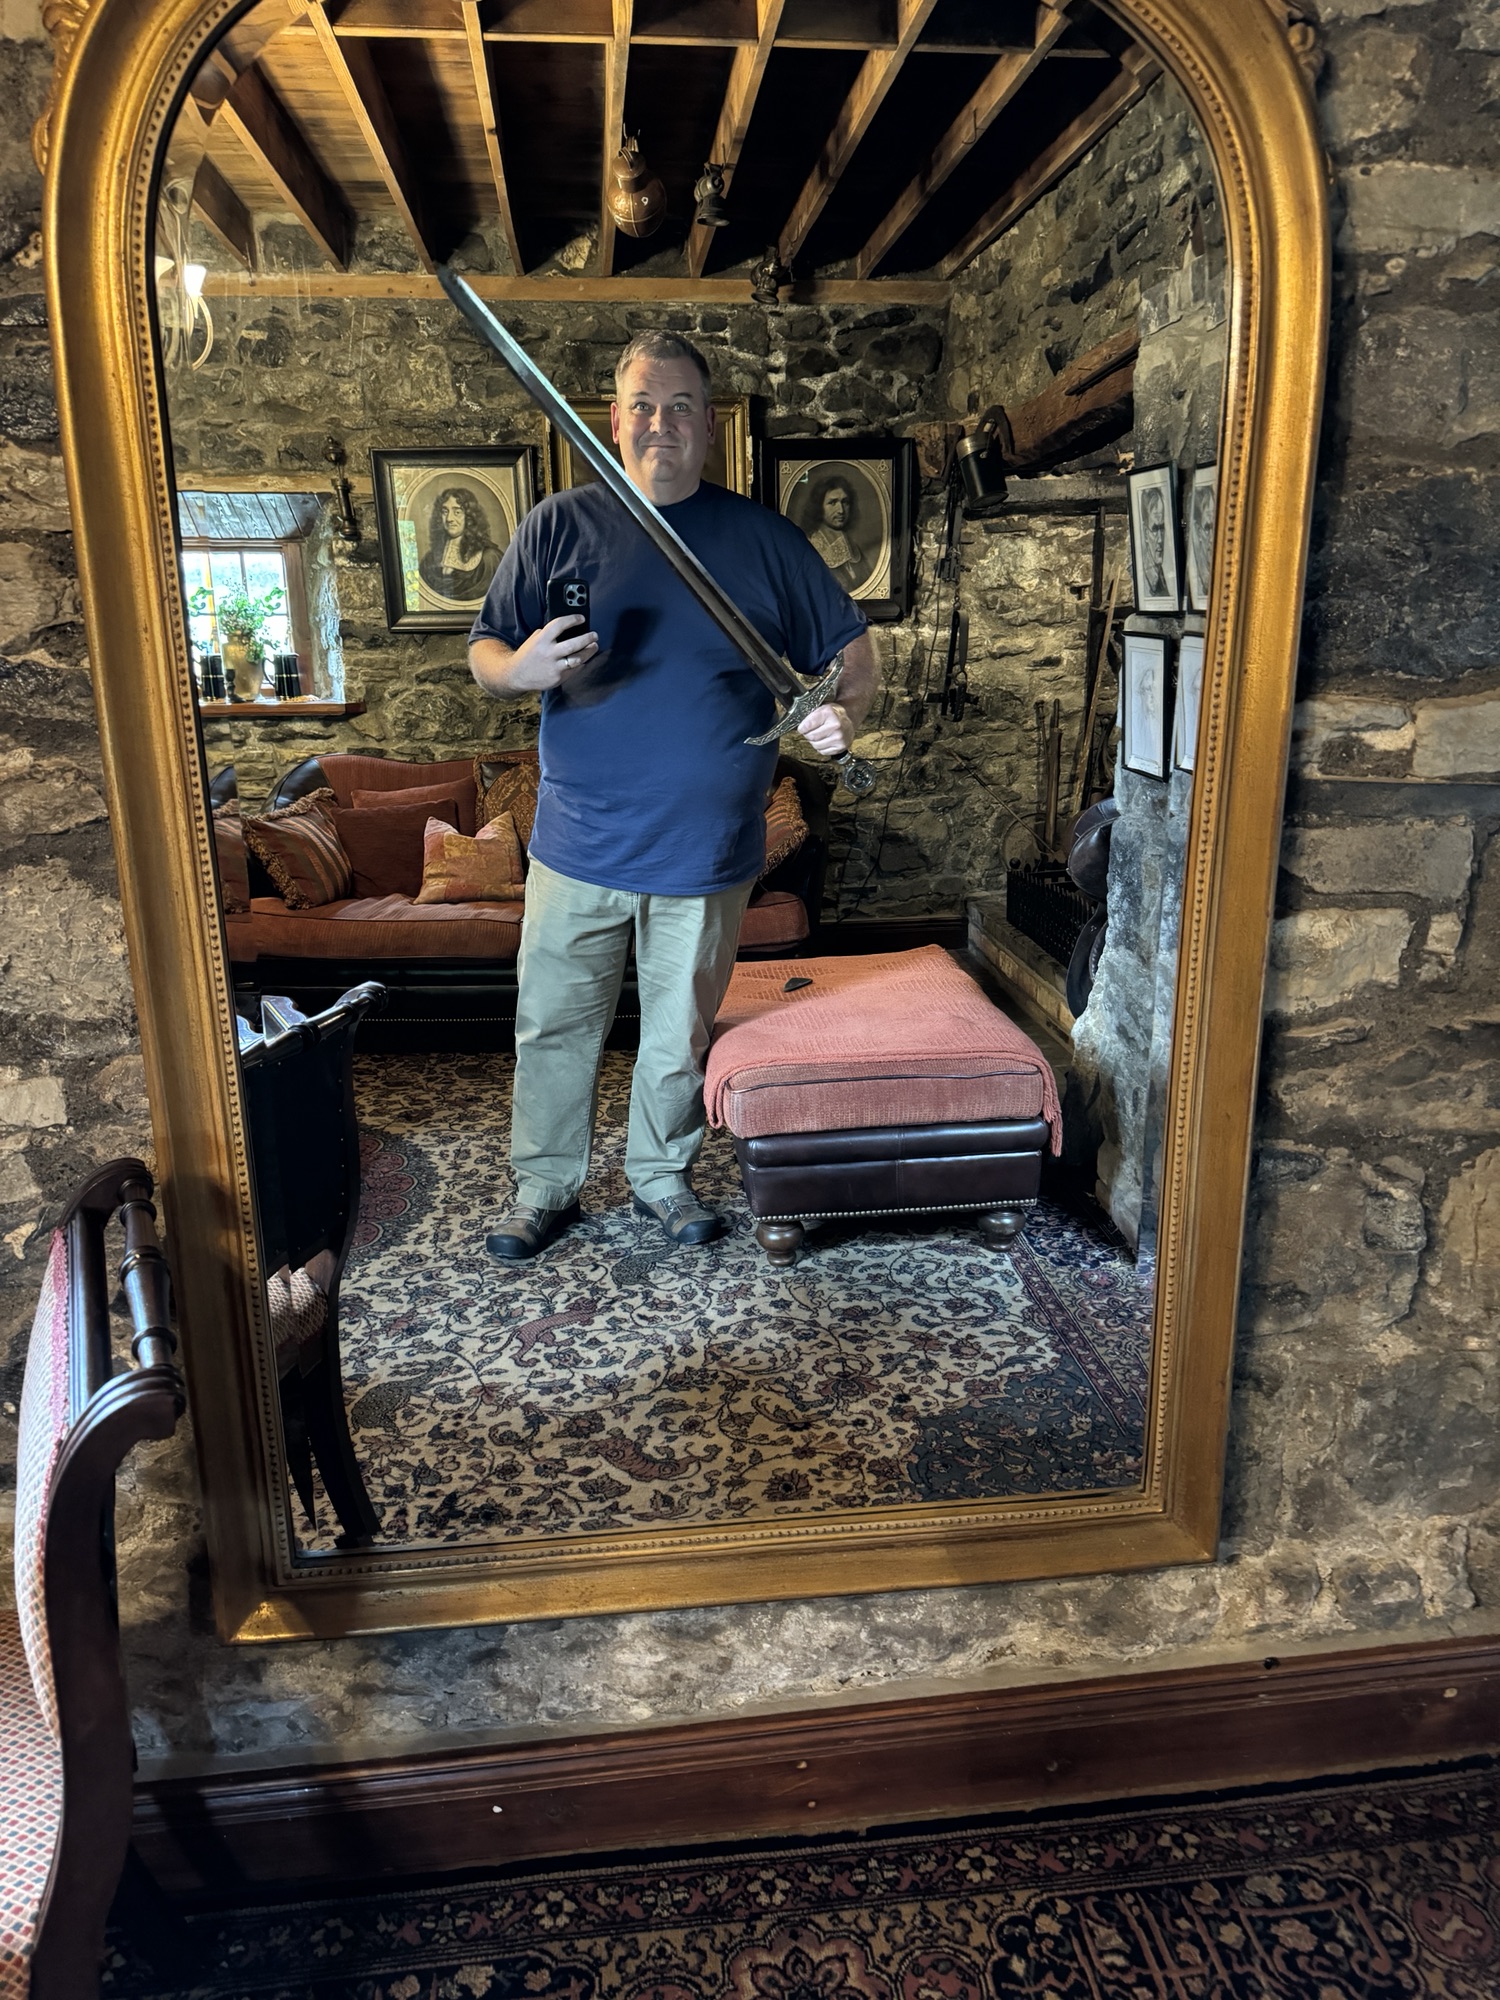 Me posing with a very realistic sword. It looks like it could be a prop from Lord of the Rings. Very heavy. Very steel. Very pointy. Moderately sharp. You could do some real damage with this thing.